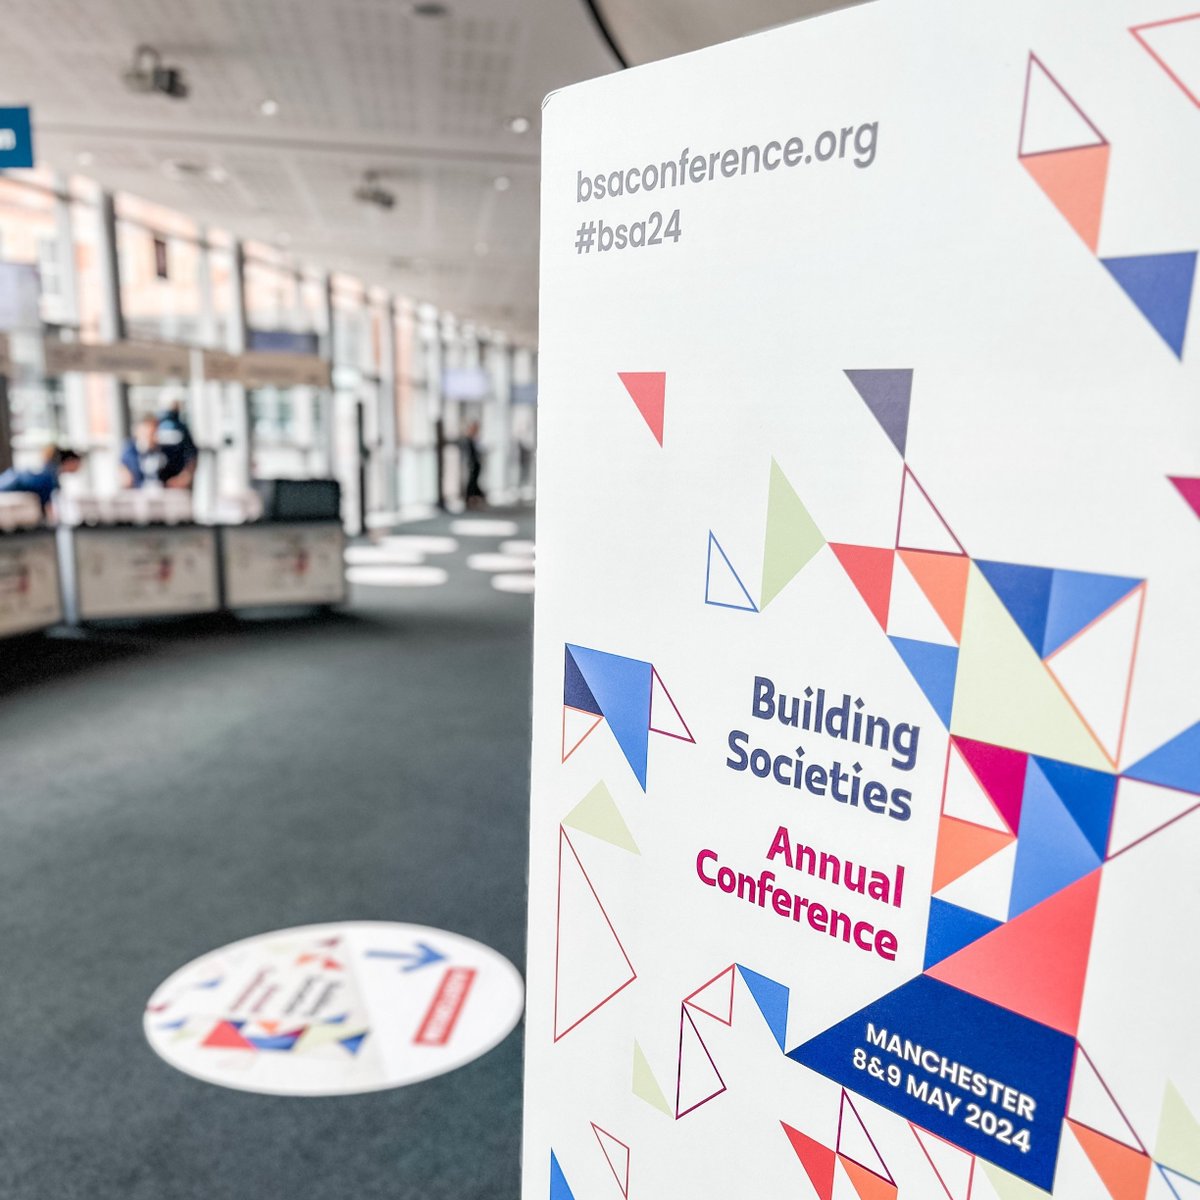 Our New Business Sales Executive, @Scott_Newman87, is attending the @BSABuildingSocs’s Annual Conference in Manchester today. Scott is excited to hear from the great line up of speakers at #bsa24. If you see him about, don’t hesitate to say hello!